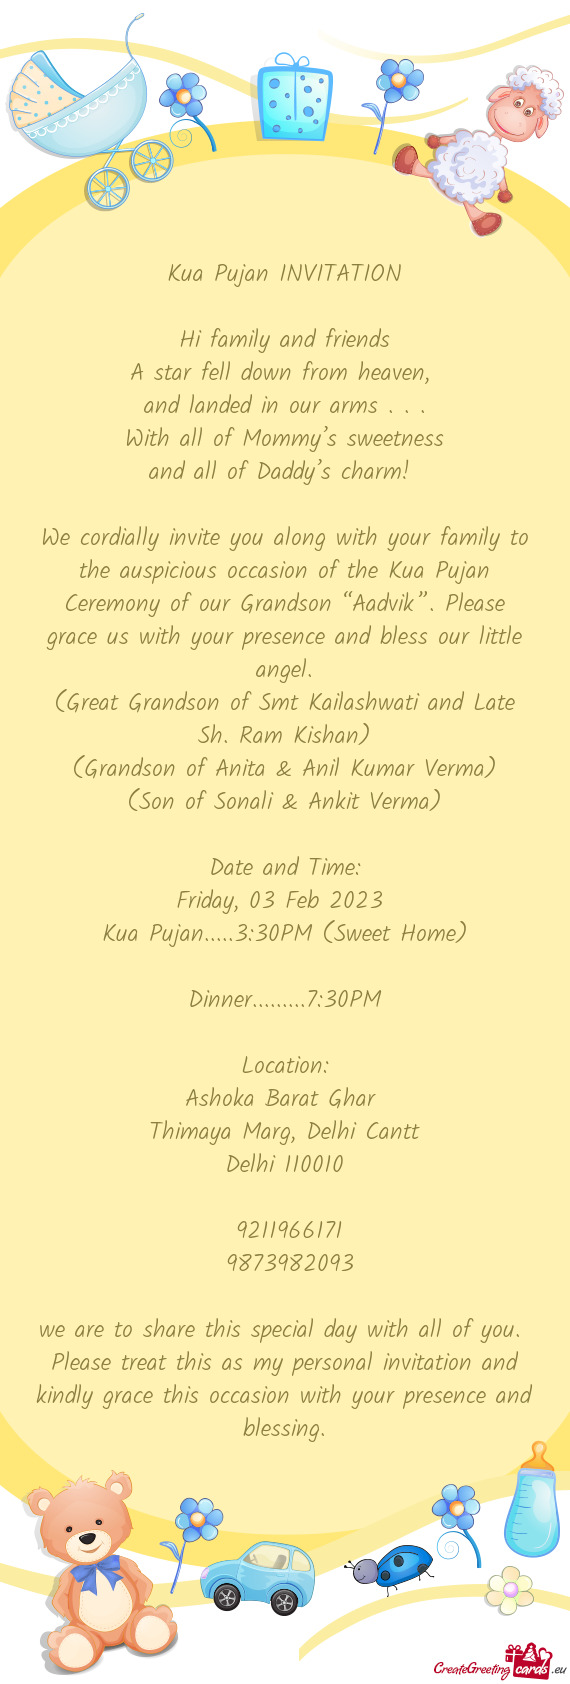 We cordially invite you along with your family to the auspicious occasion of the Kua Pujan Ceremony